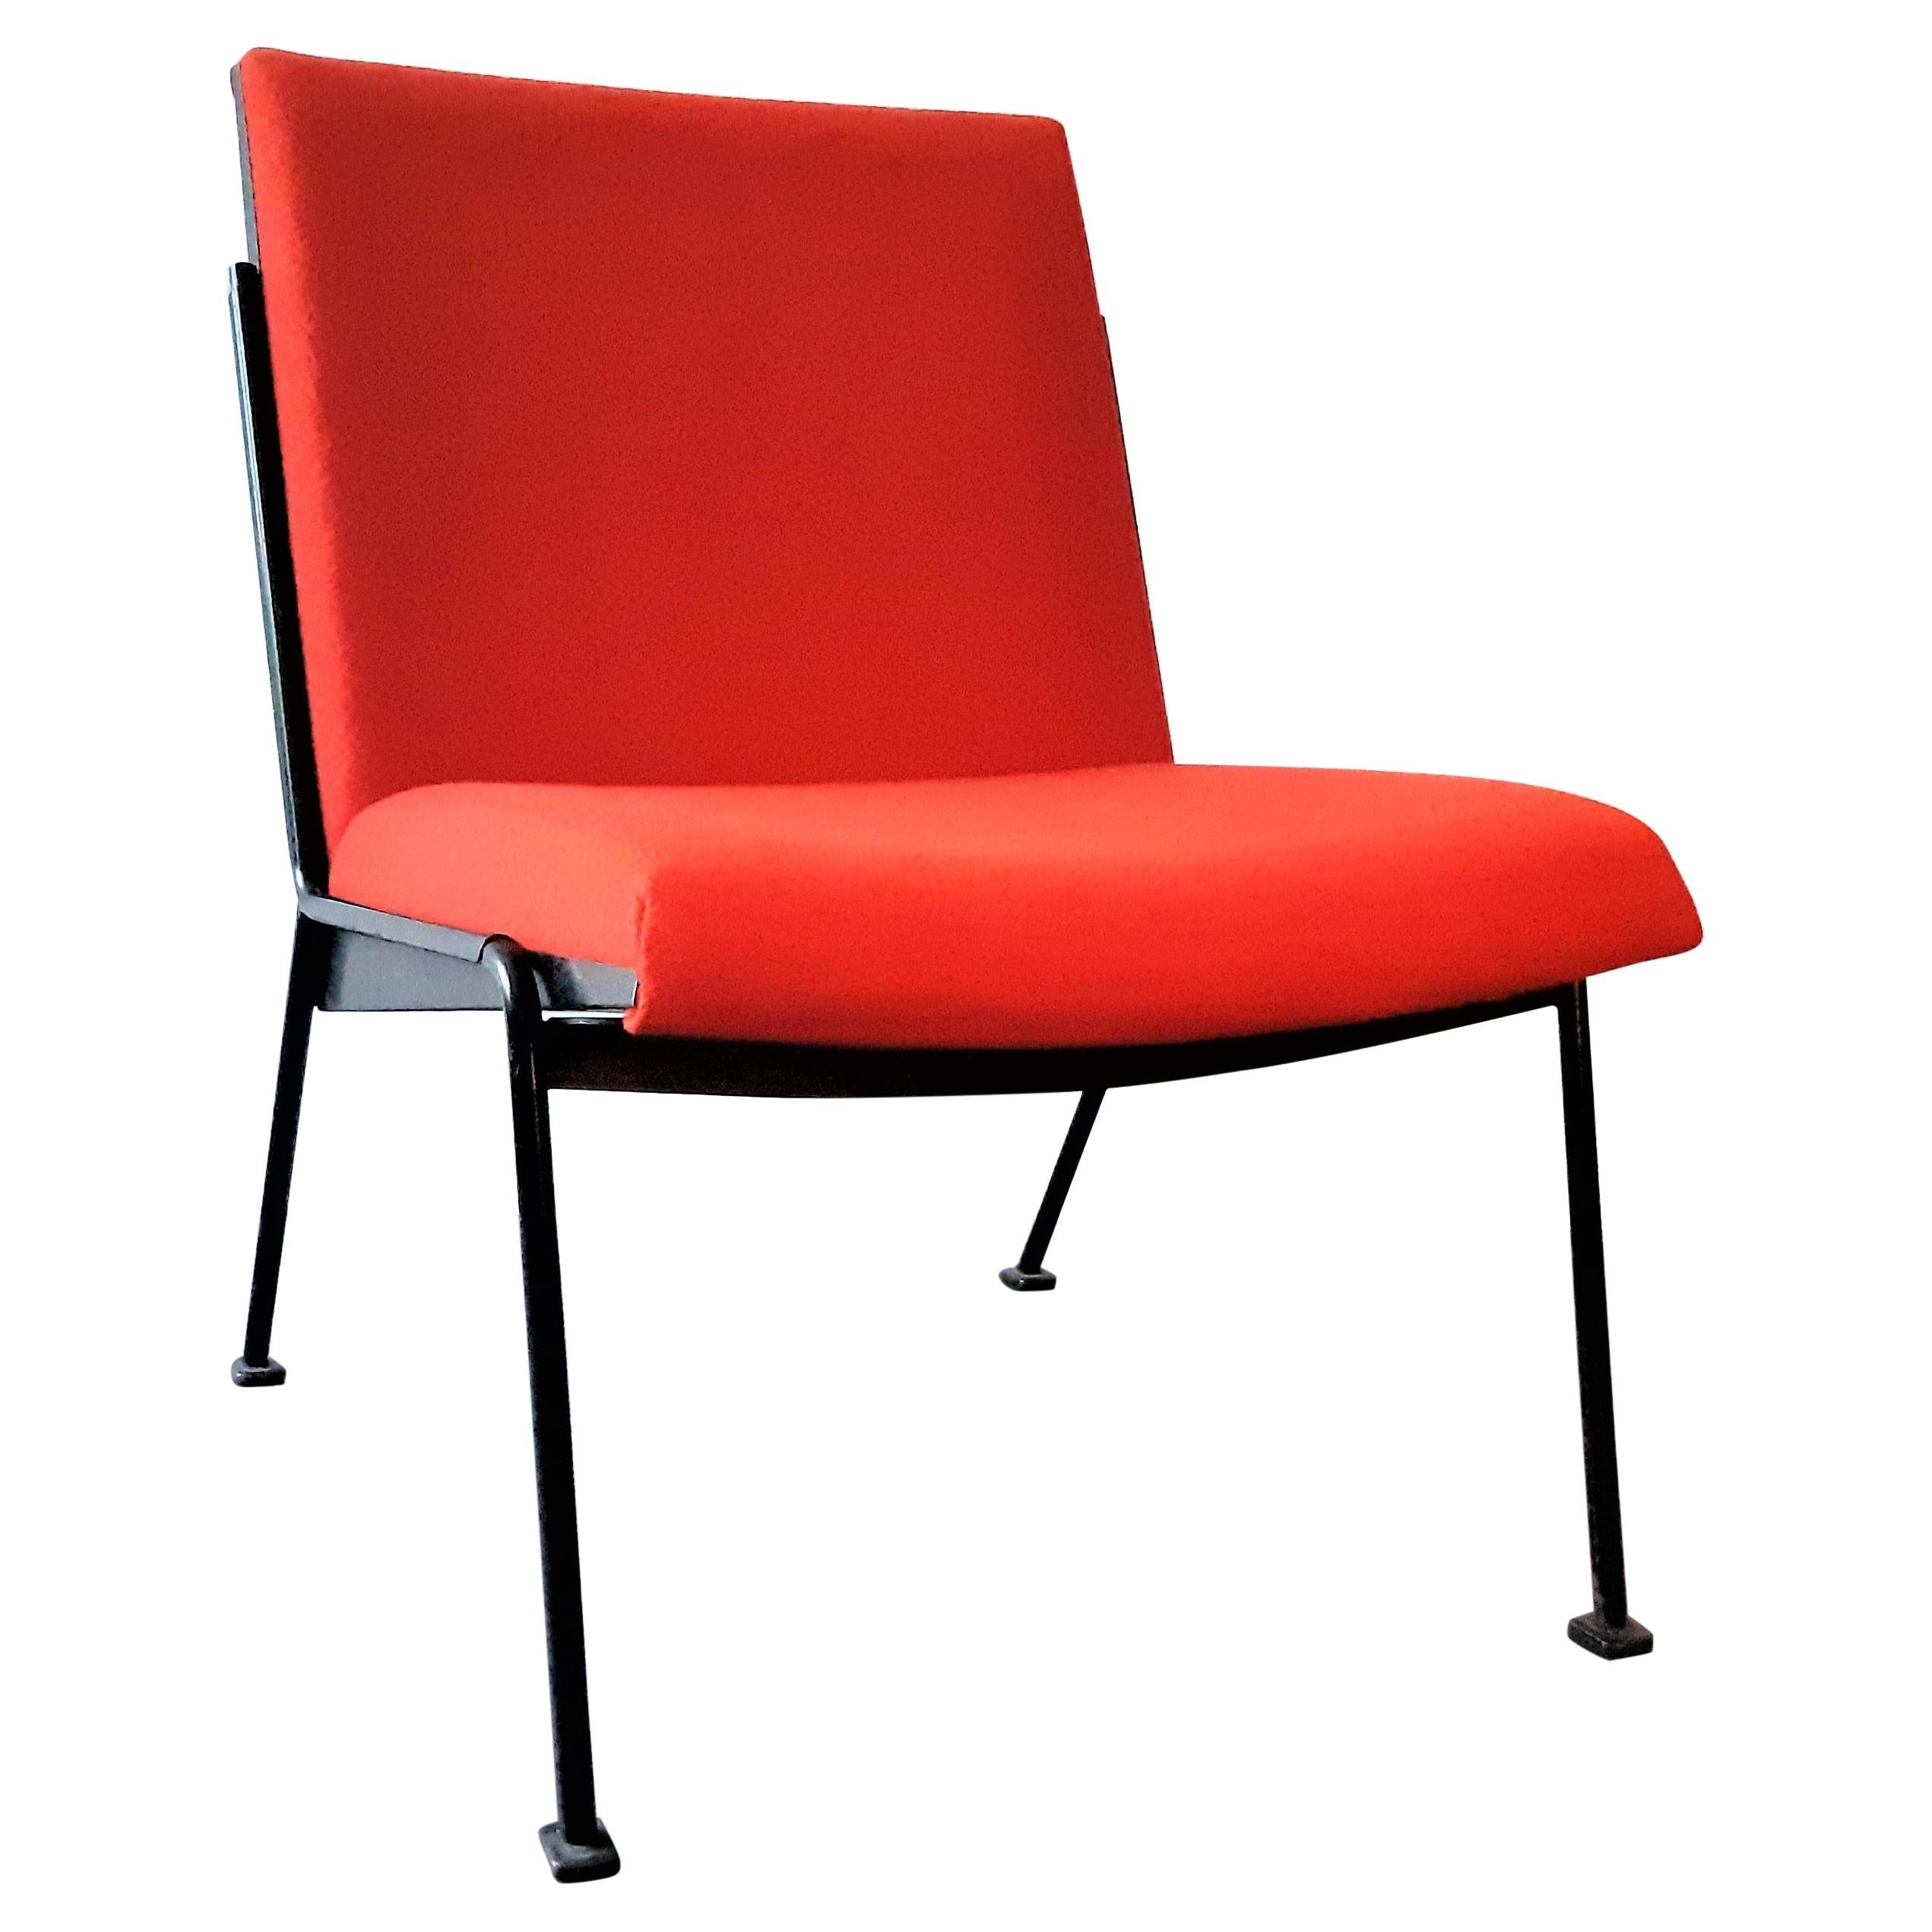 Red 'Oase' Lounge Chair by Wim Rietveld for Ahrend de Cirkel, 1950's